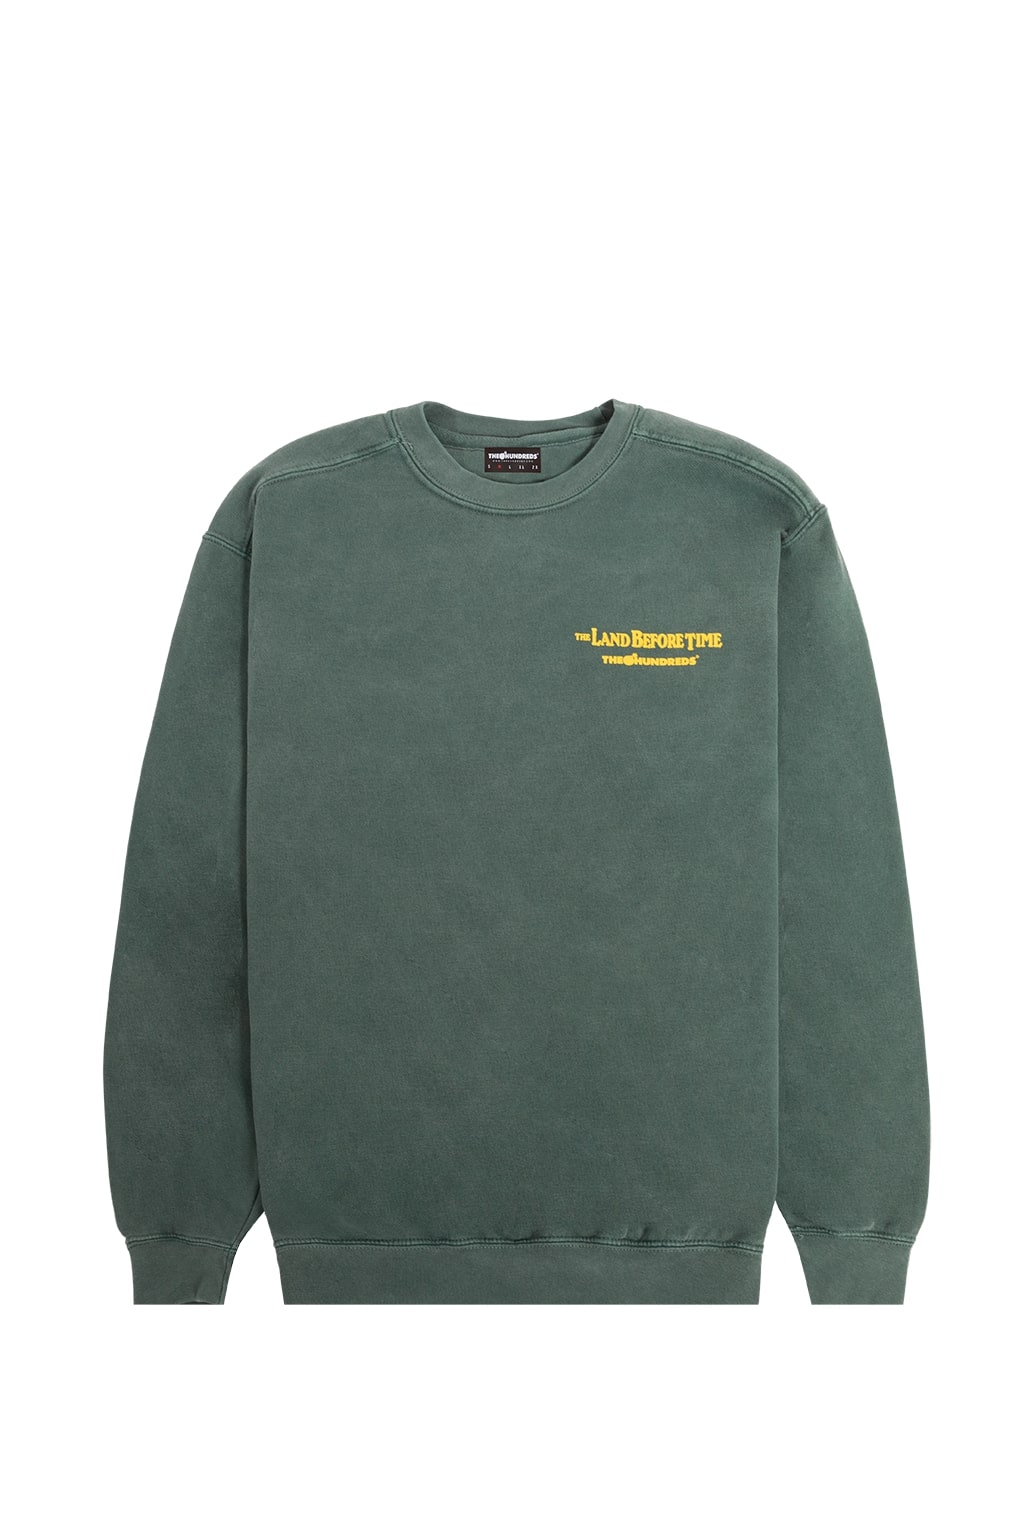 The Hundreds x Land Before Time little foot crewneck